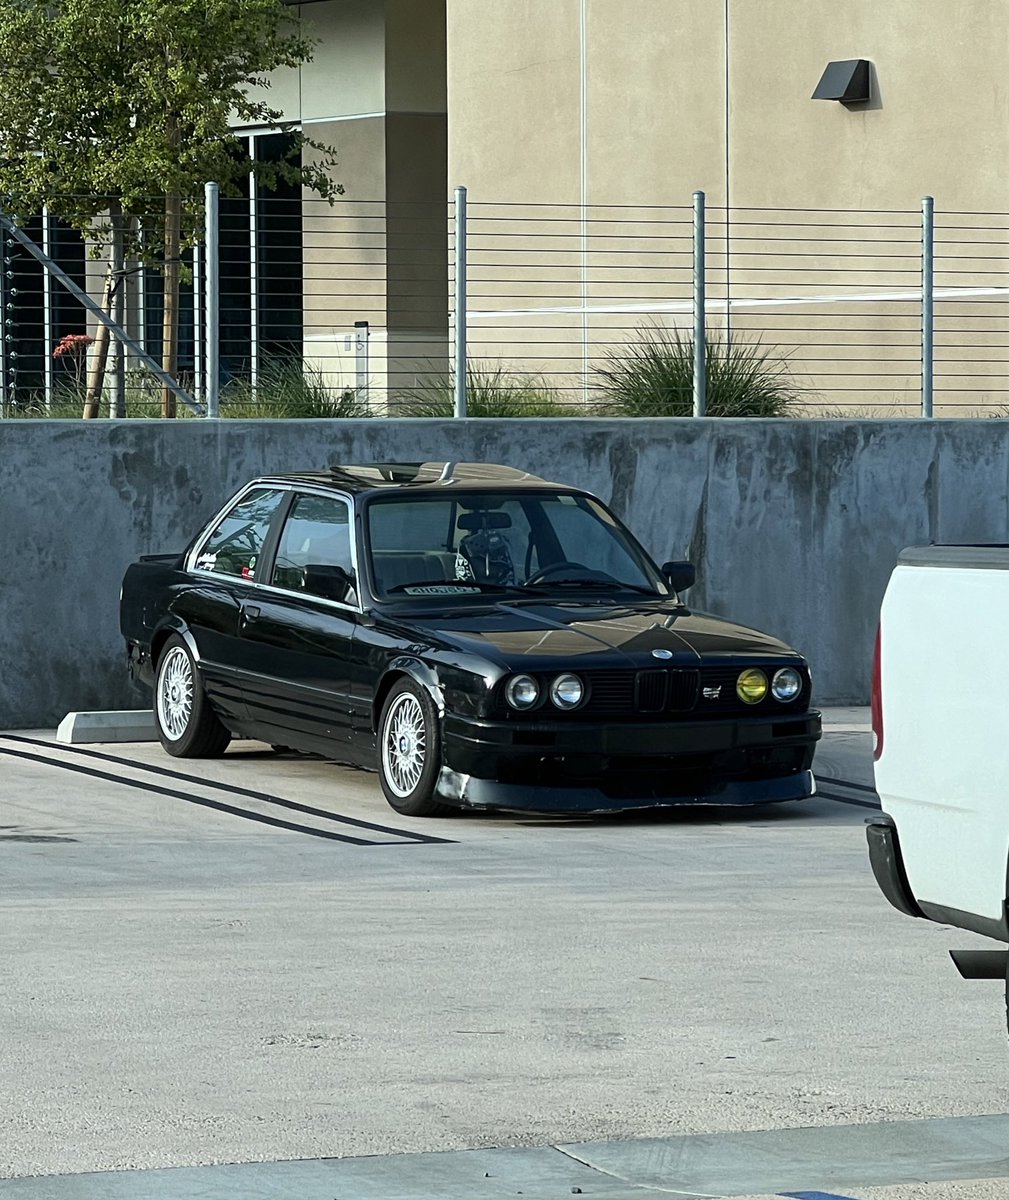 I would like to stay on the car side of X so here’s pics of my e30